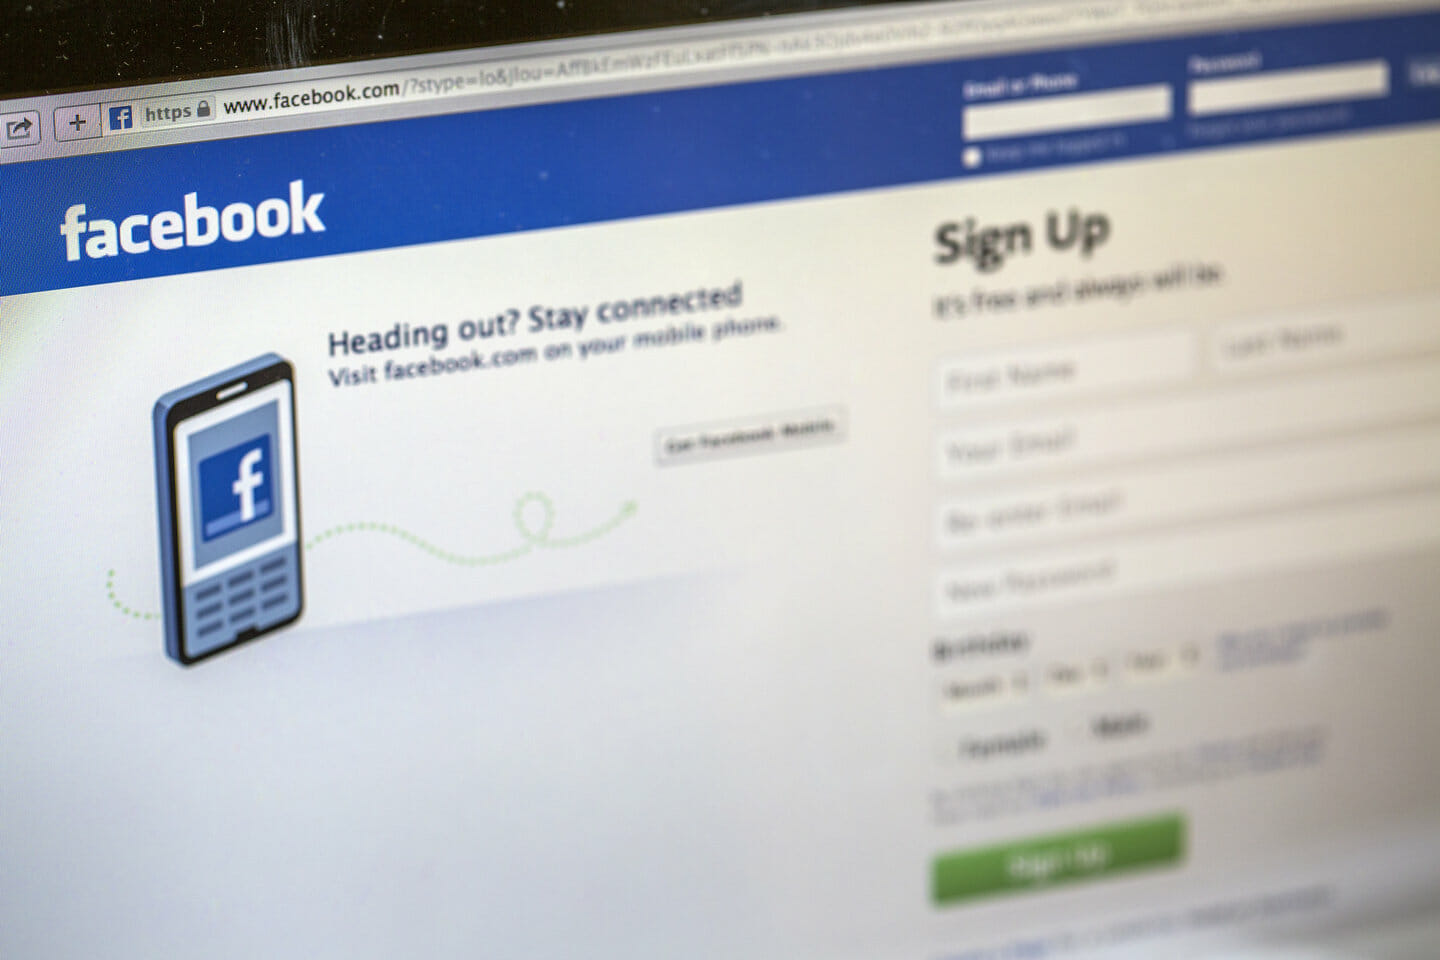 a screenshot of the login/register page of Facebook.